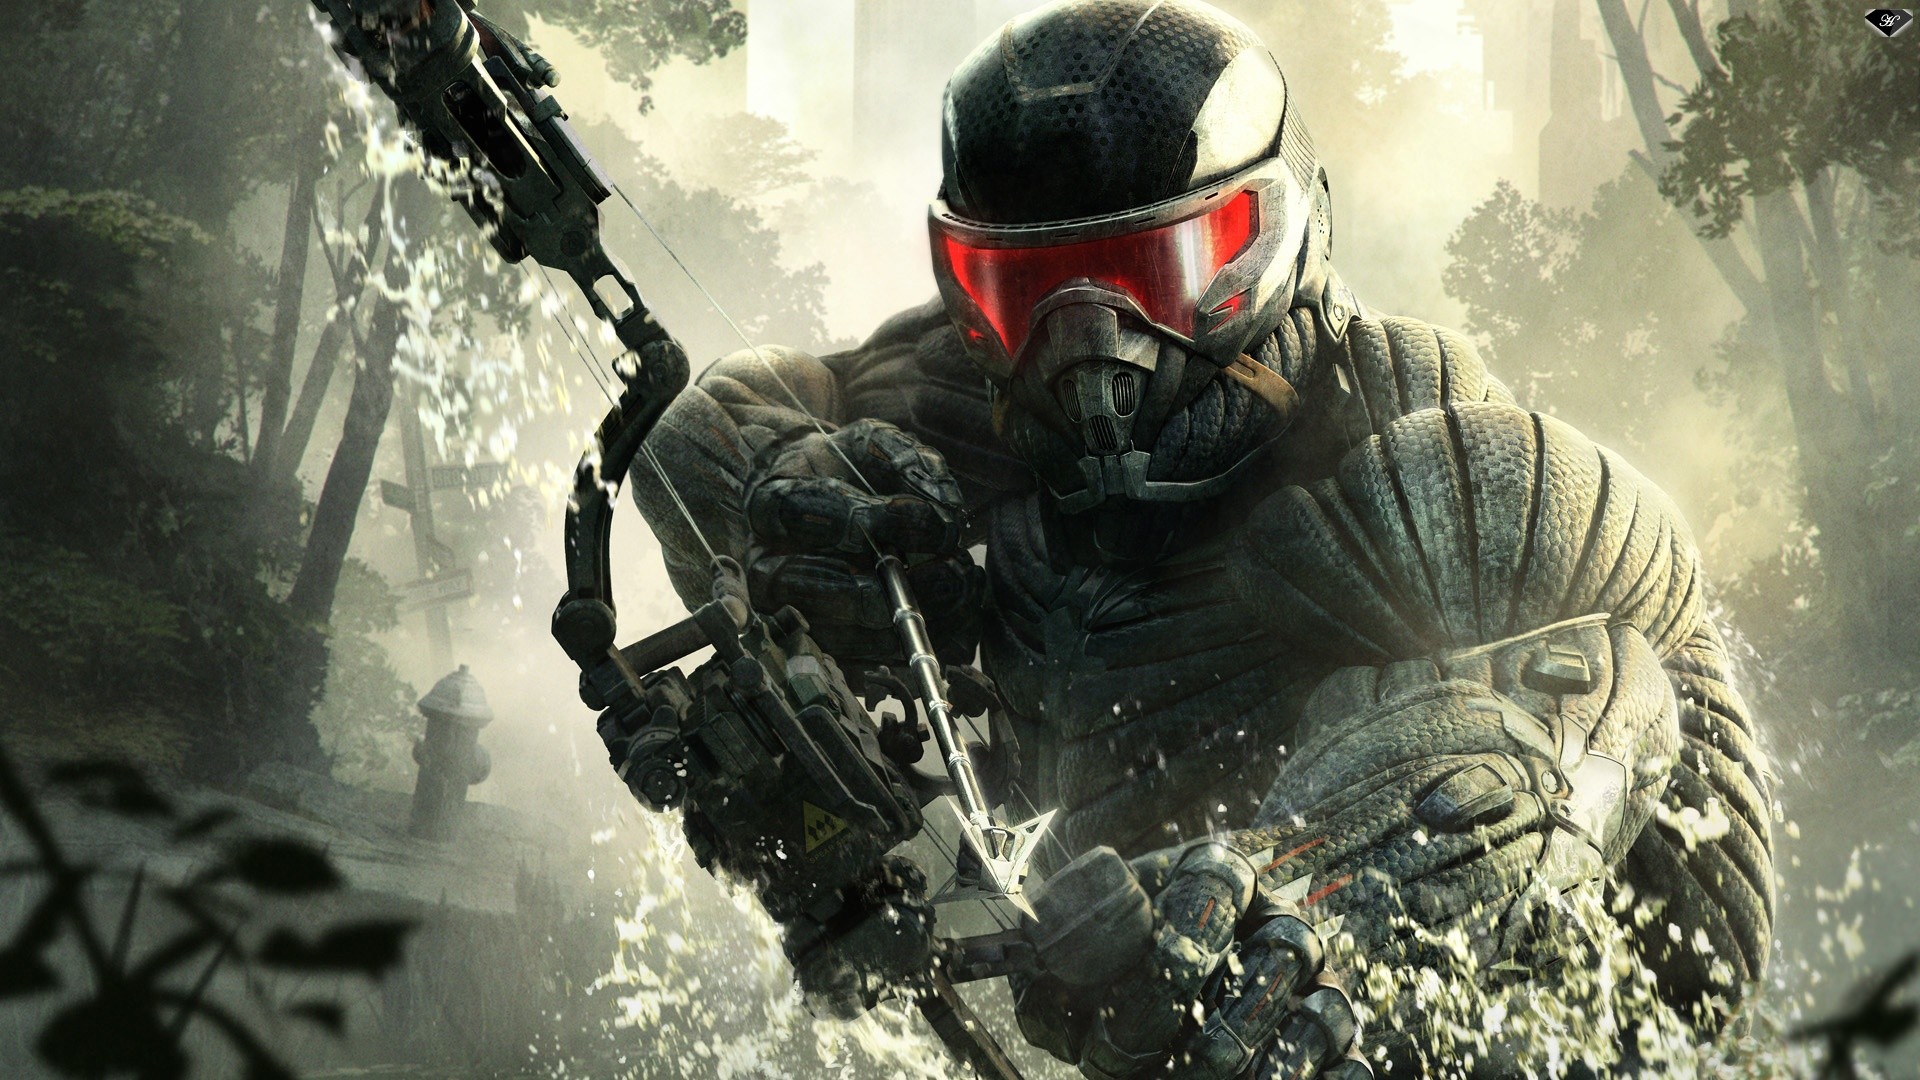 General 1920x1080 video games video game art Crysis PC gaming bow science fiction